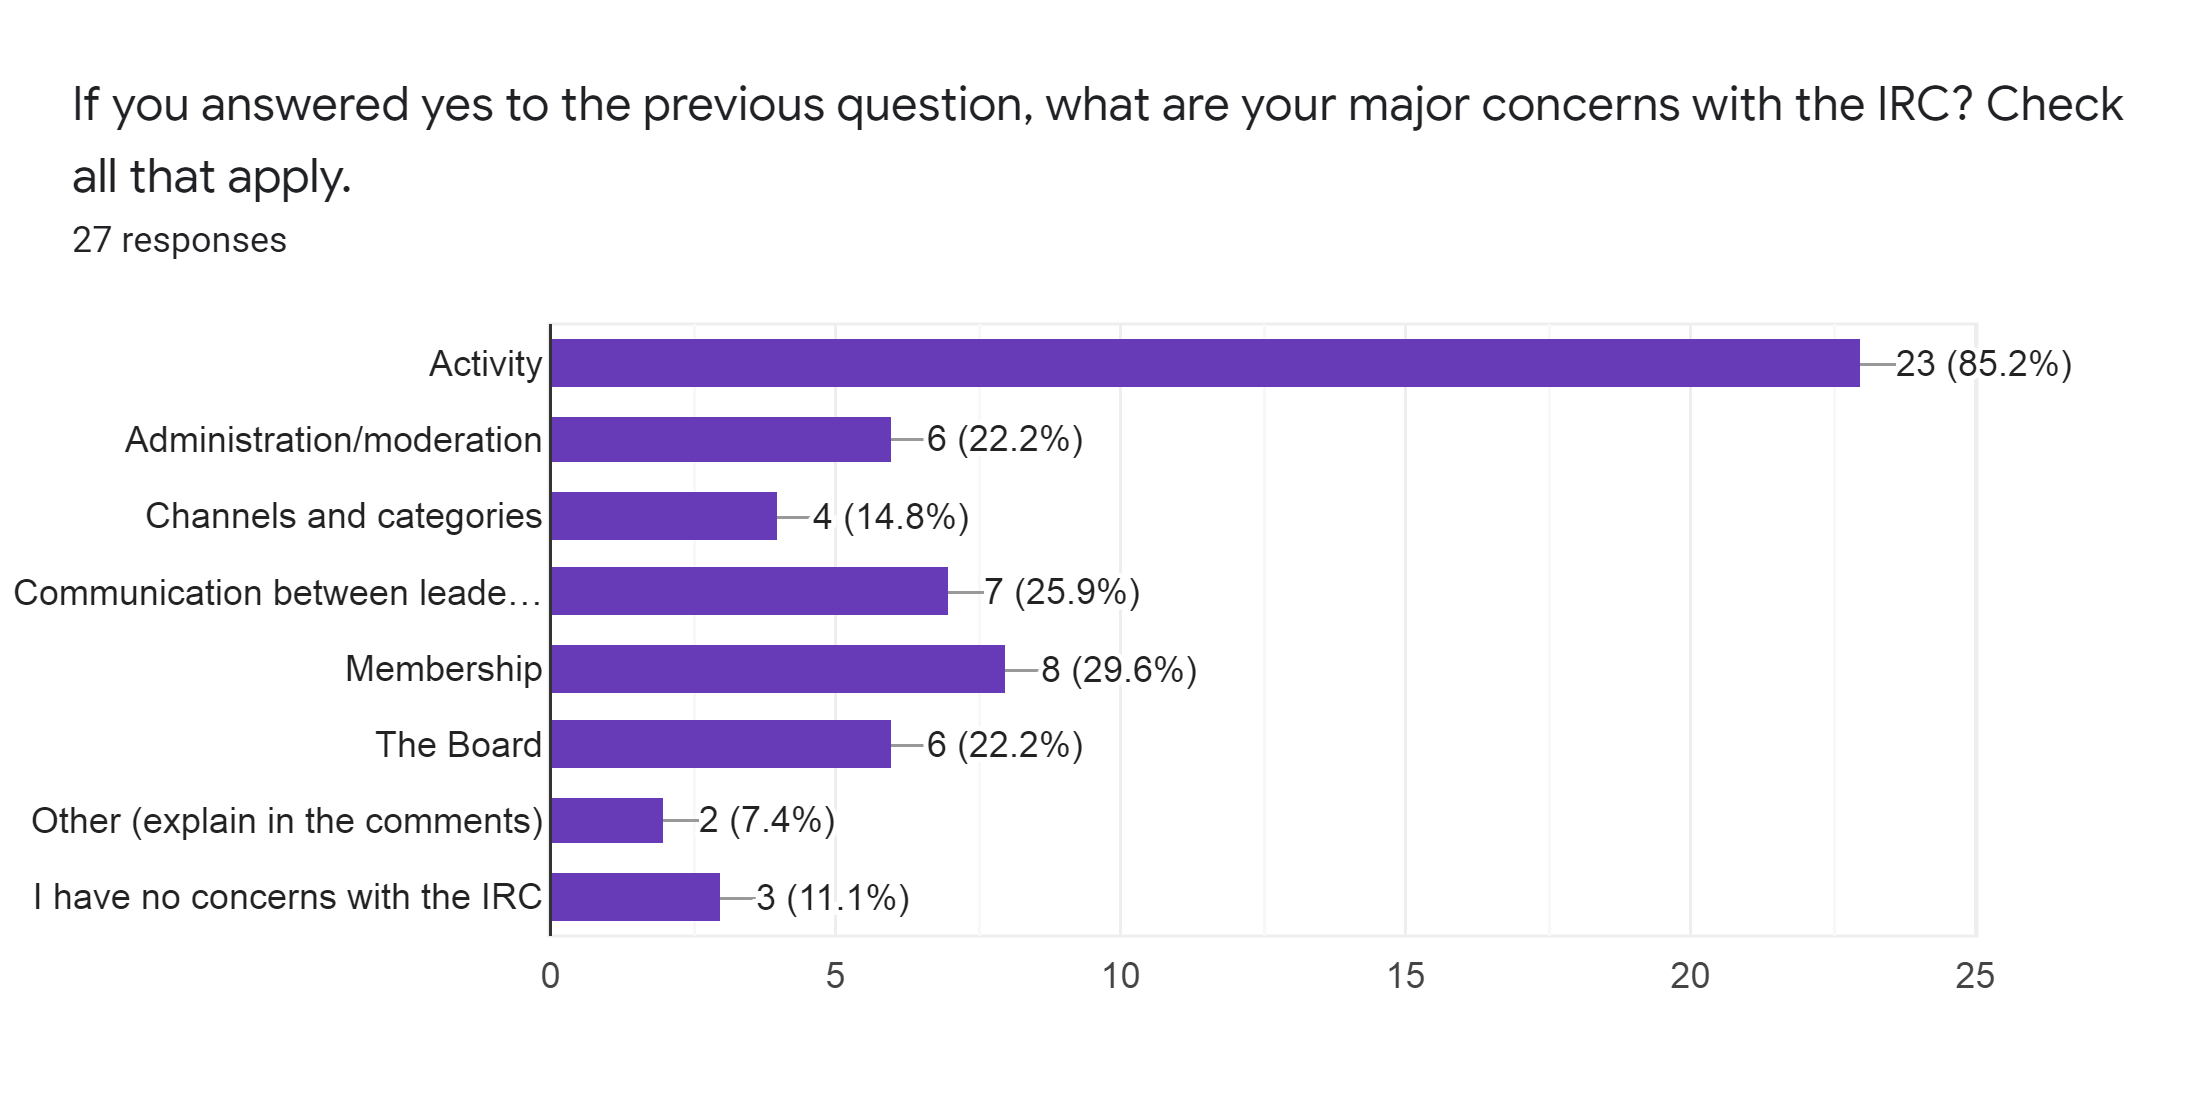 Forms response chart. Question title: If you answered yes to the previous question, what are your major concerns with the IRC? Check all that apply.. Number of responses: 27 responses.